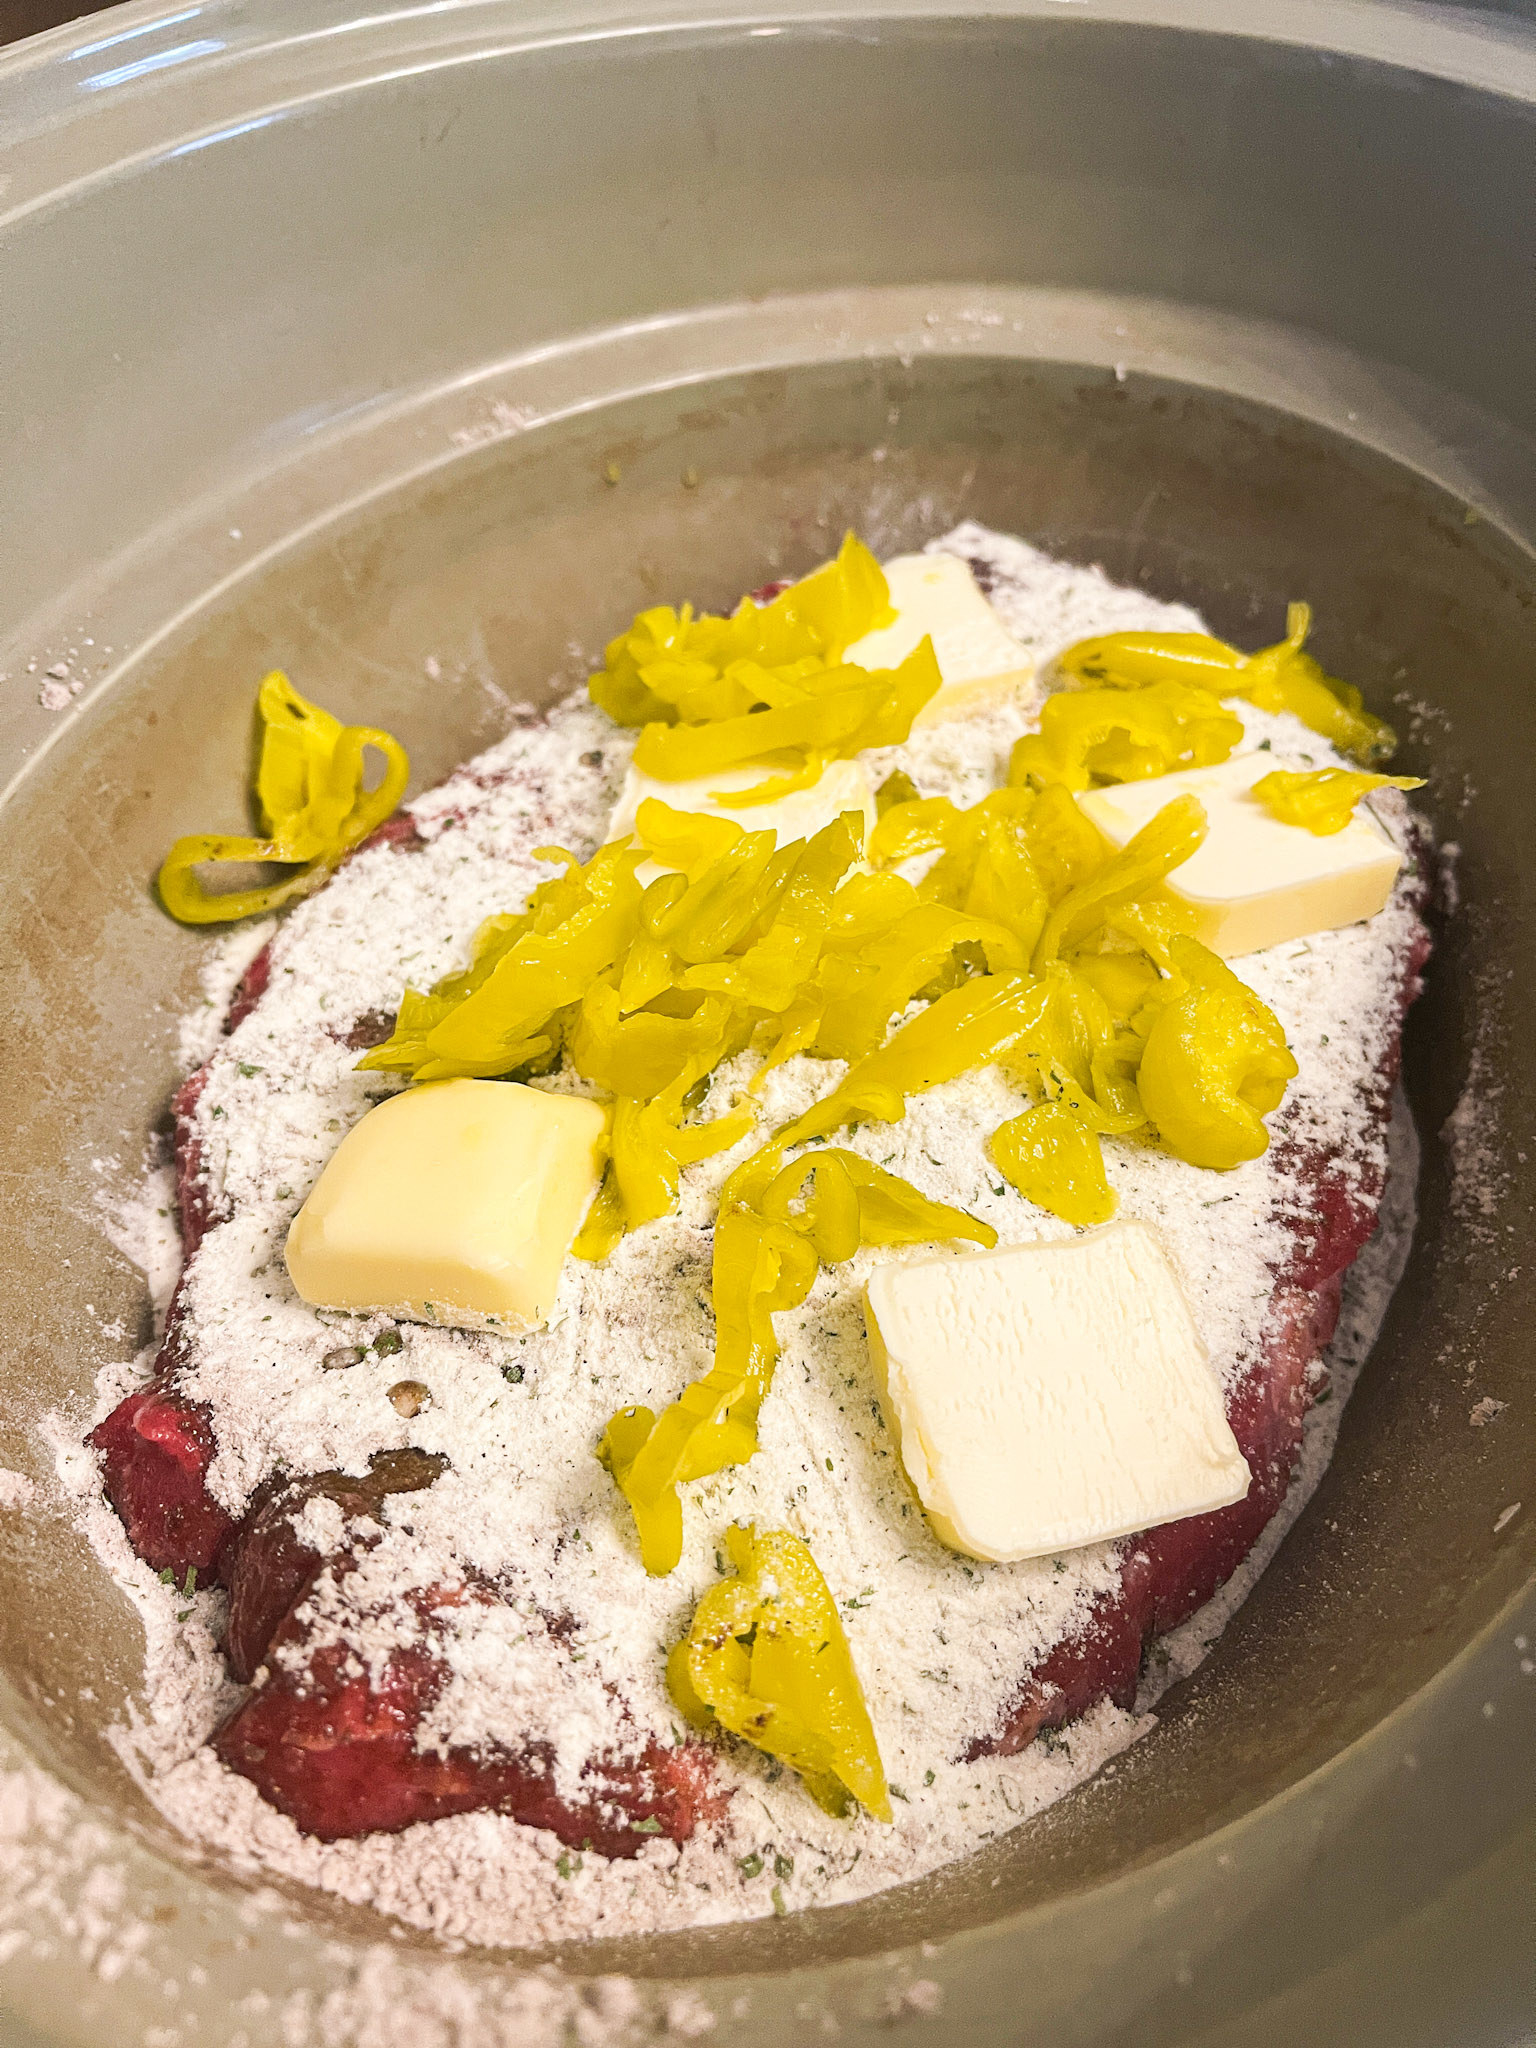 butter, pepperoncini peppers, and sauce mixes on top of roast in crock pot